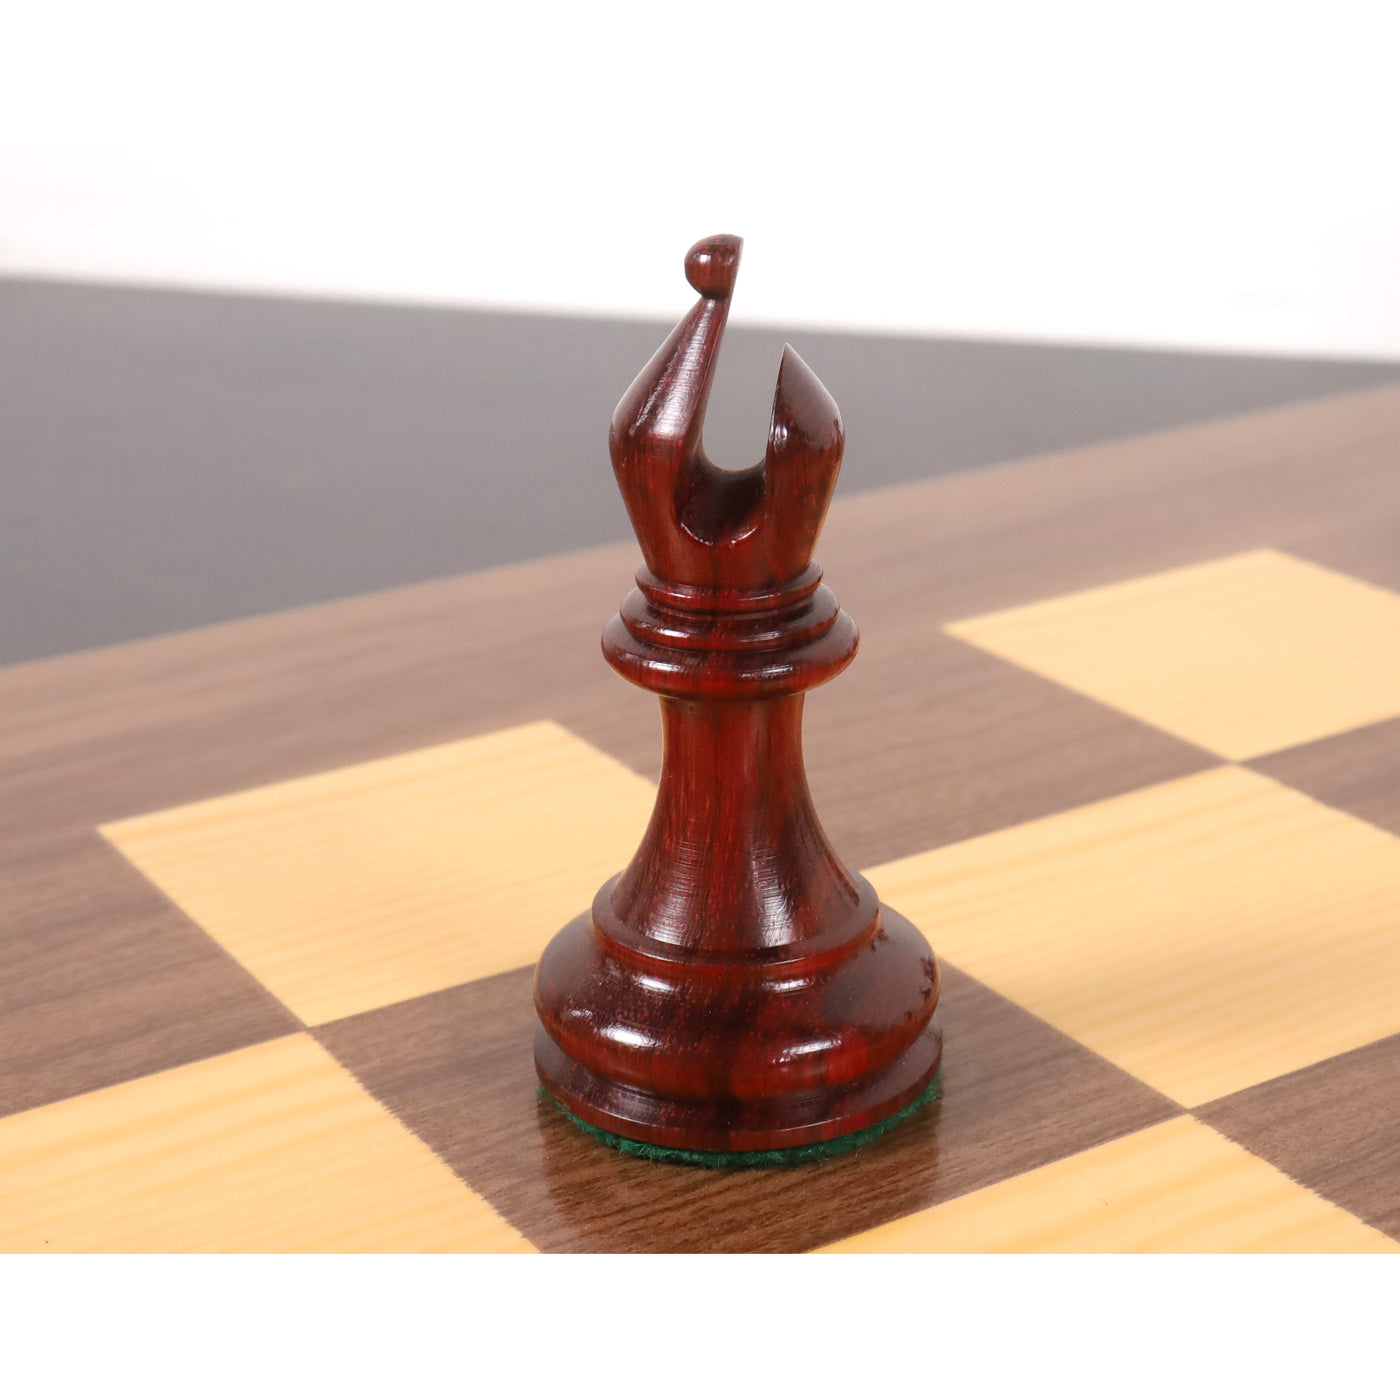 2021 Sinquefield Cup Reproduced Staunton Chess Pieces Only set - Triple weighted Bud Rose Wood